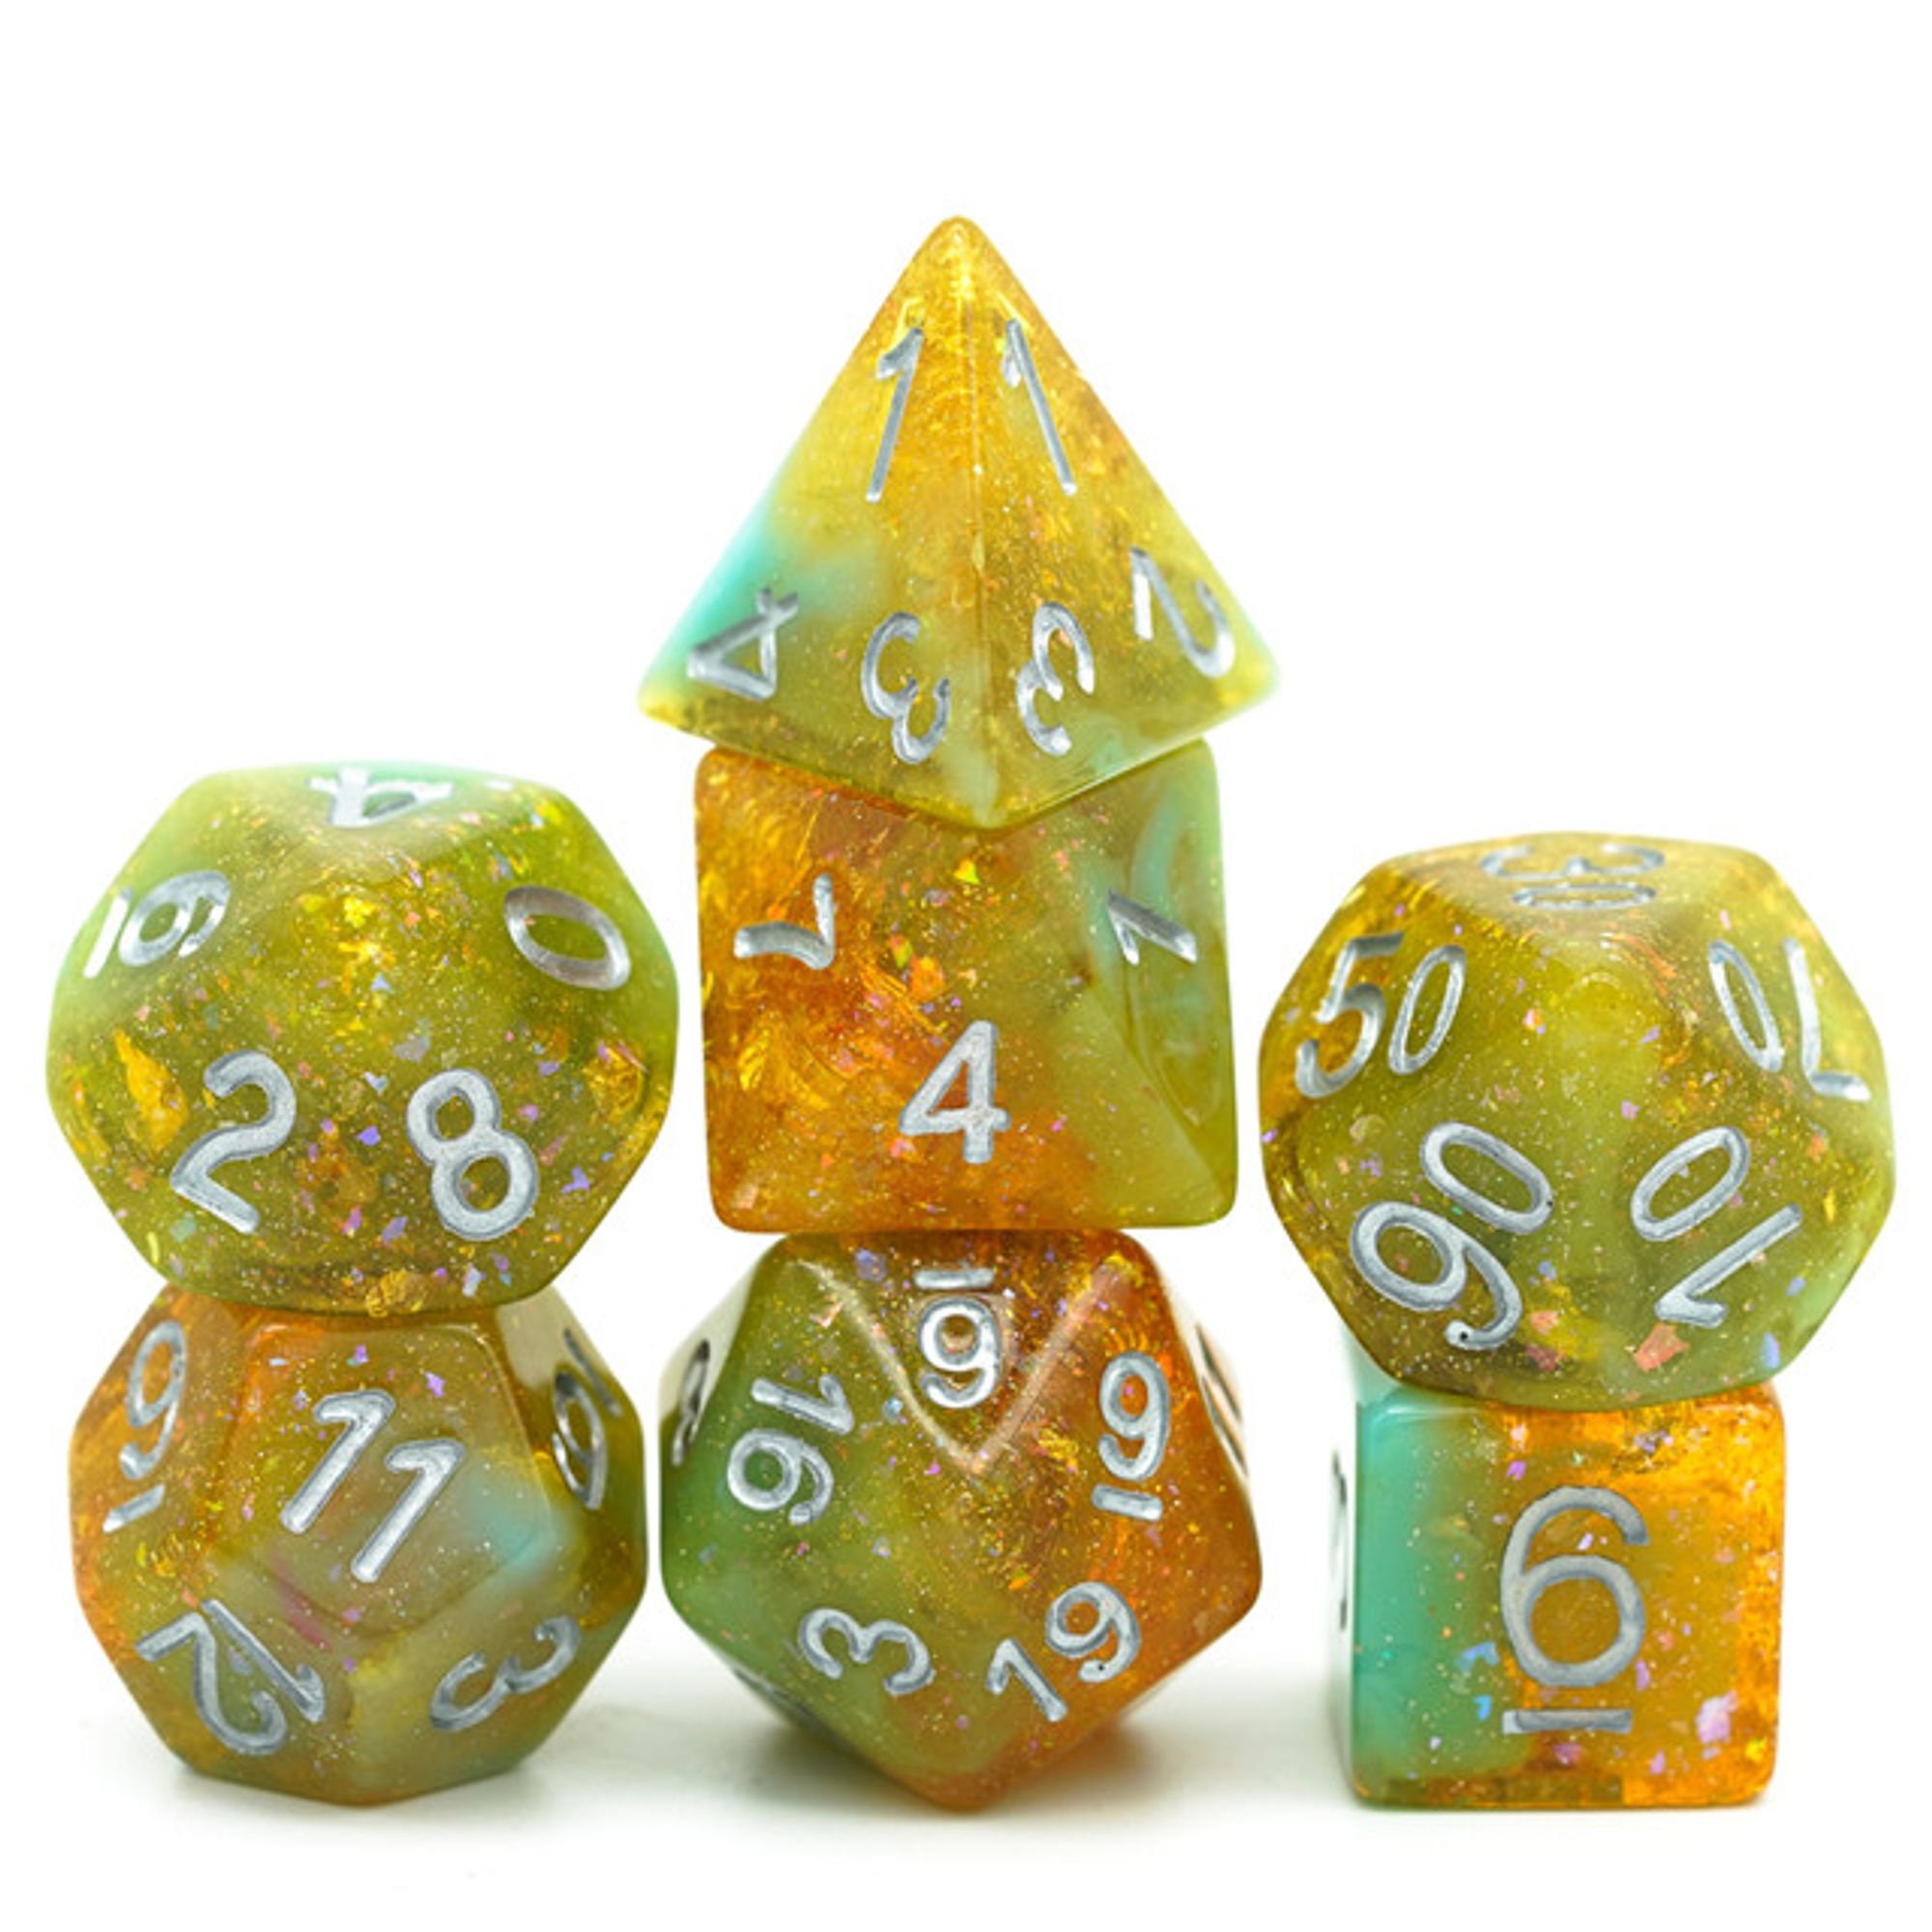 Customisable D4 Dice DND Boardgame RPG Dungeons and Dragons Tabletop Games  Unique Glitter Shimmer Sparkle Personal Gift Striking D10 D6 D8 